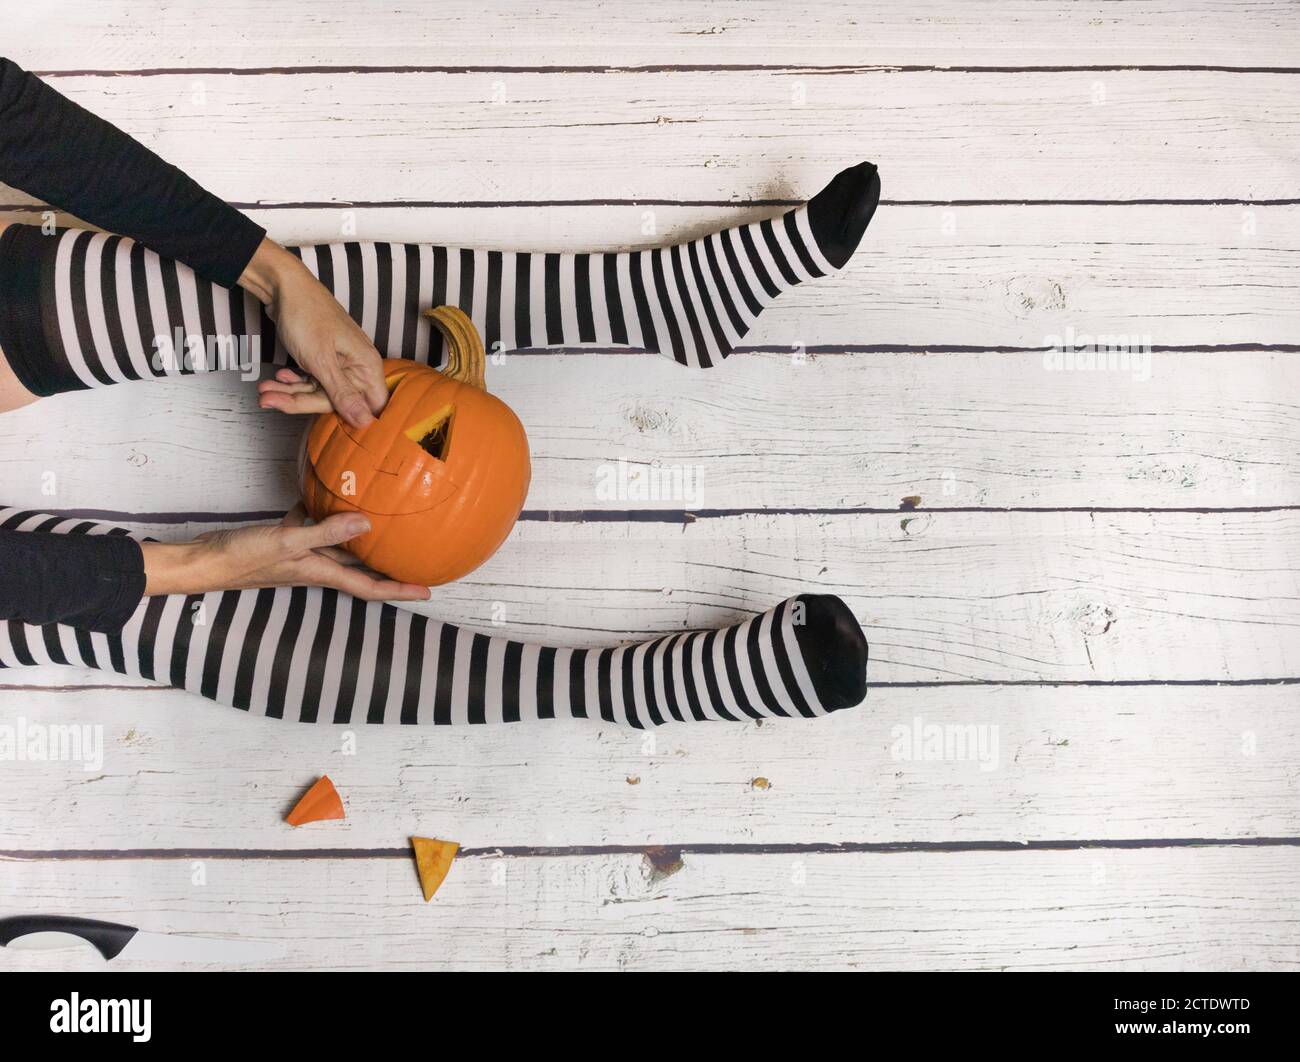 Woman in striped stockings preparing pumpkin for Halloween, on a white wooden background Stock Photo